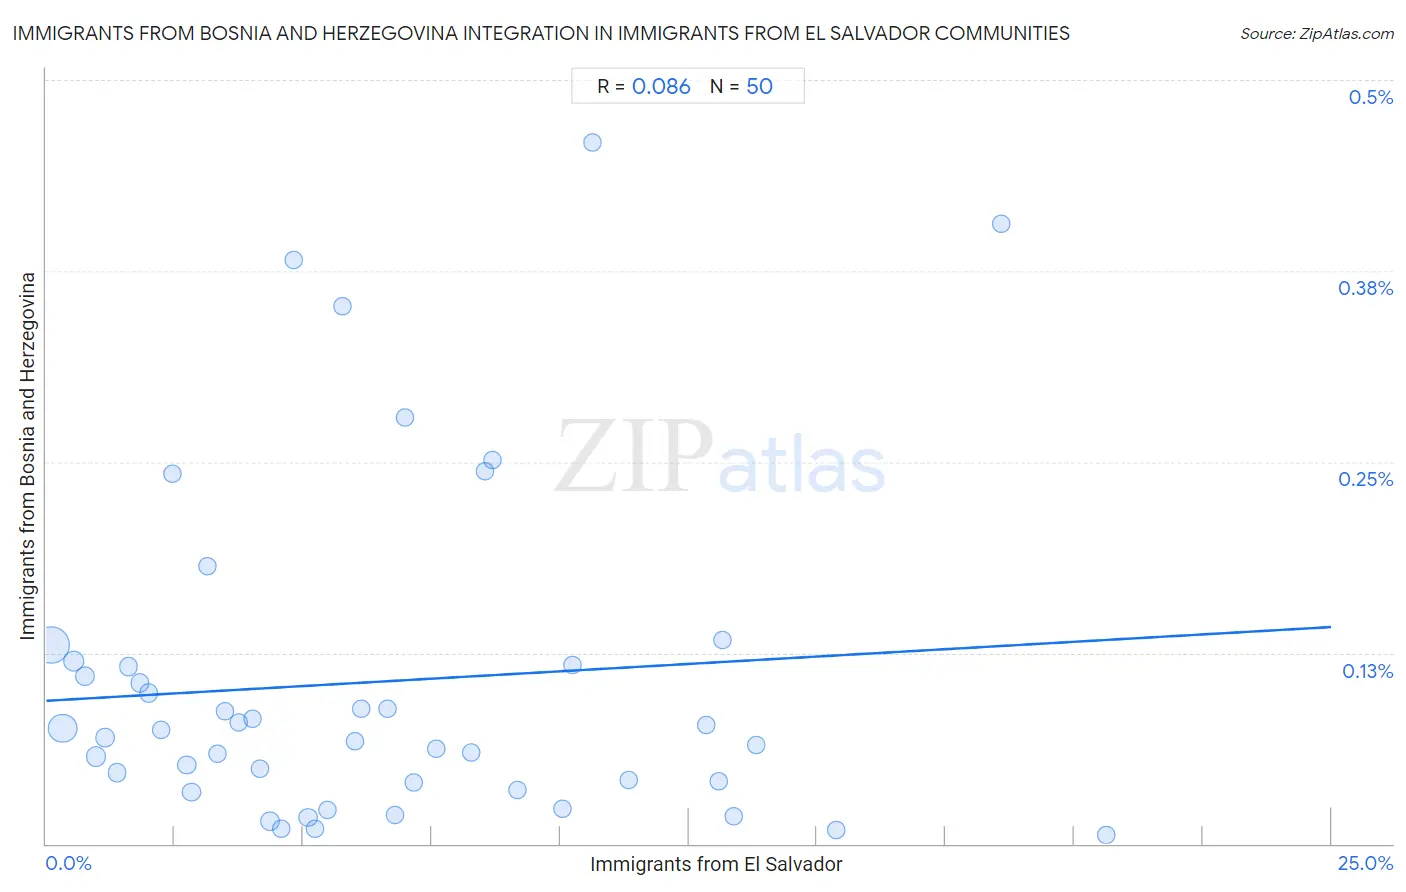 Immigrants from El Salvador Integration in Immigrants from Bosnia and Herzegovina Communities